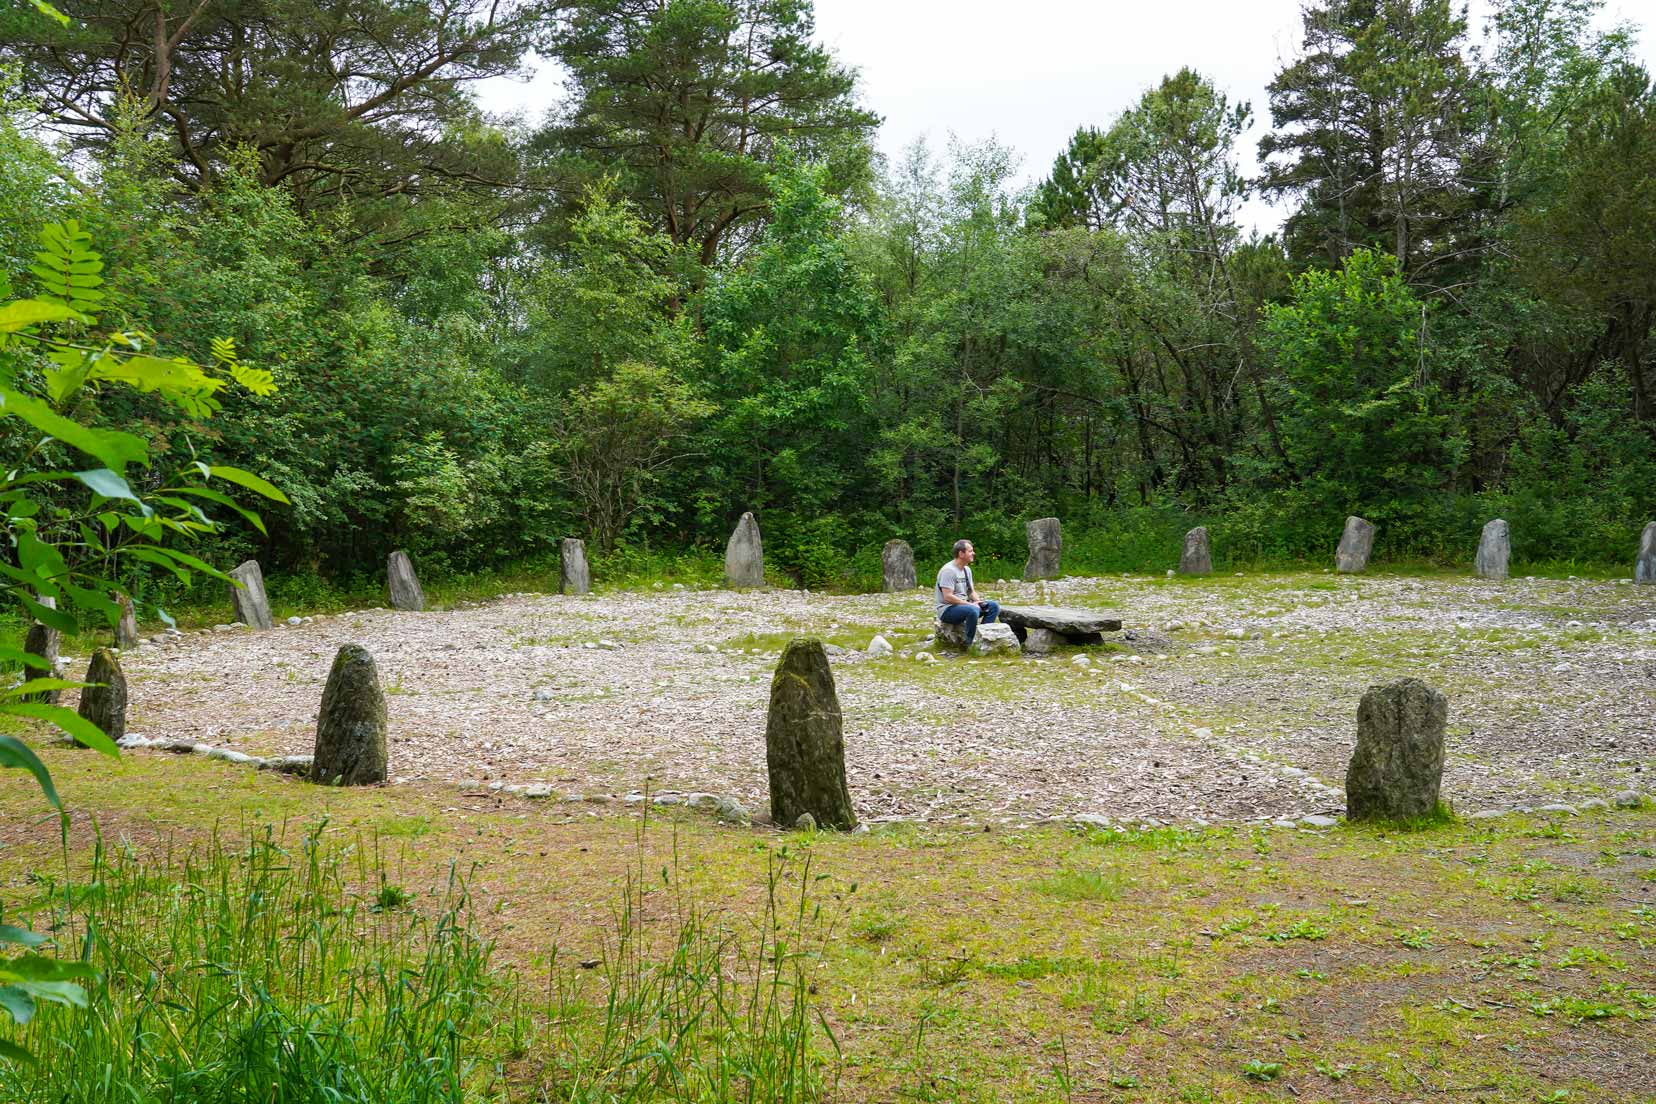 Lars sat on the centre stone of the circle of ancient granite stones in a clearing of woodland